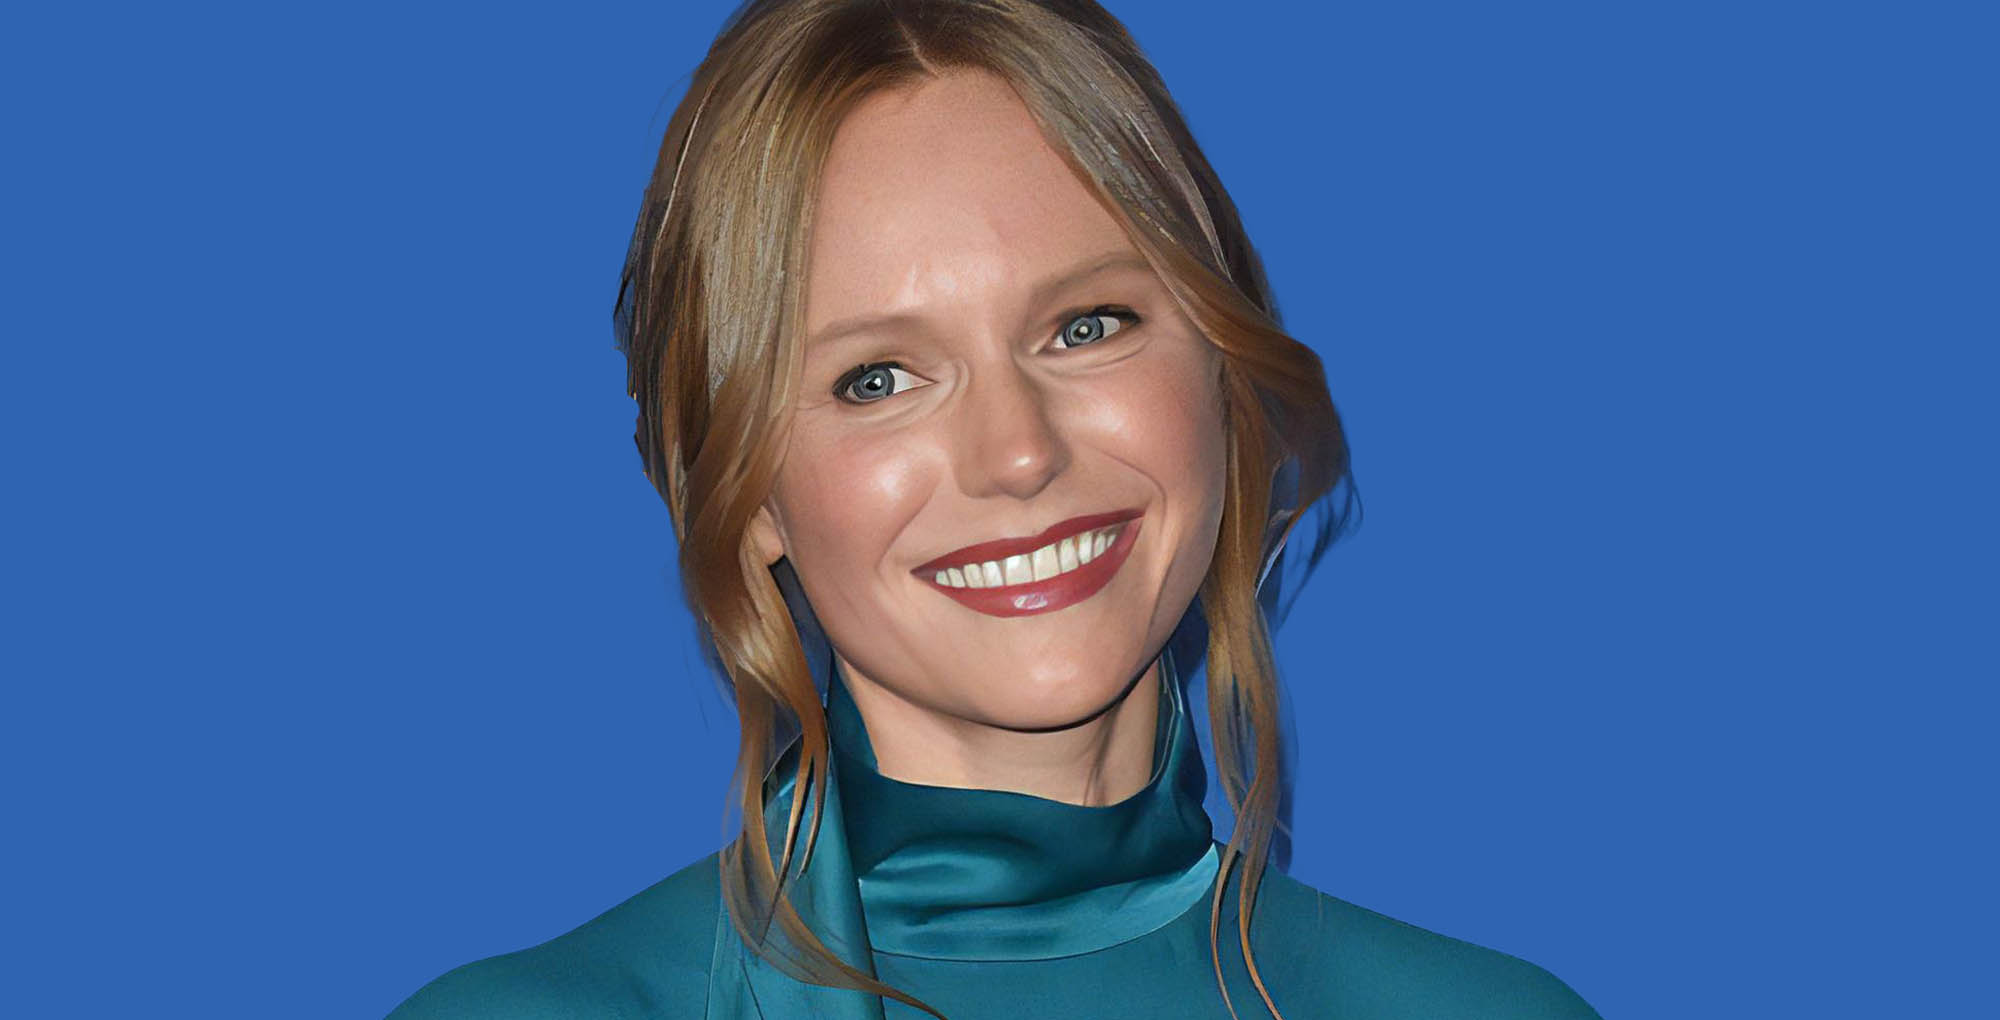 days of our lives star marci miller celebrates her birthday.